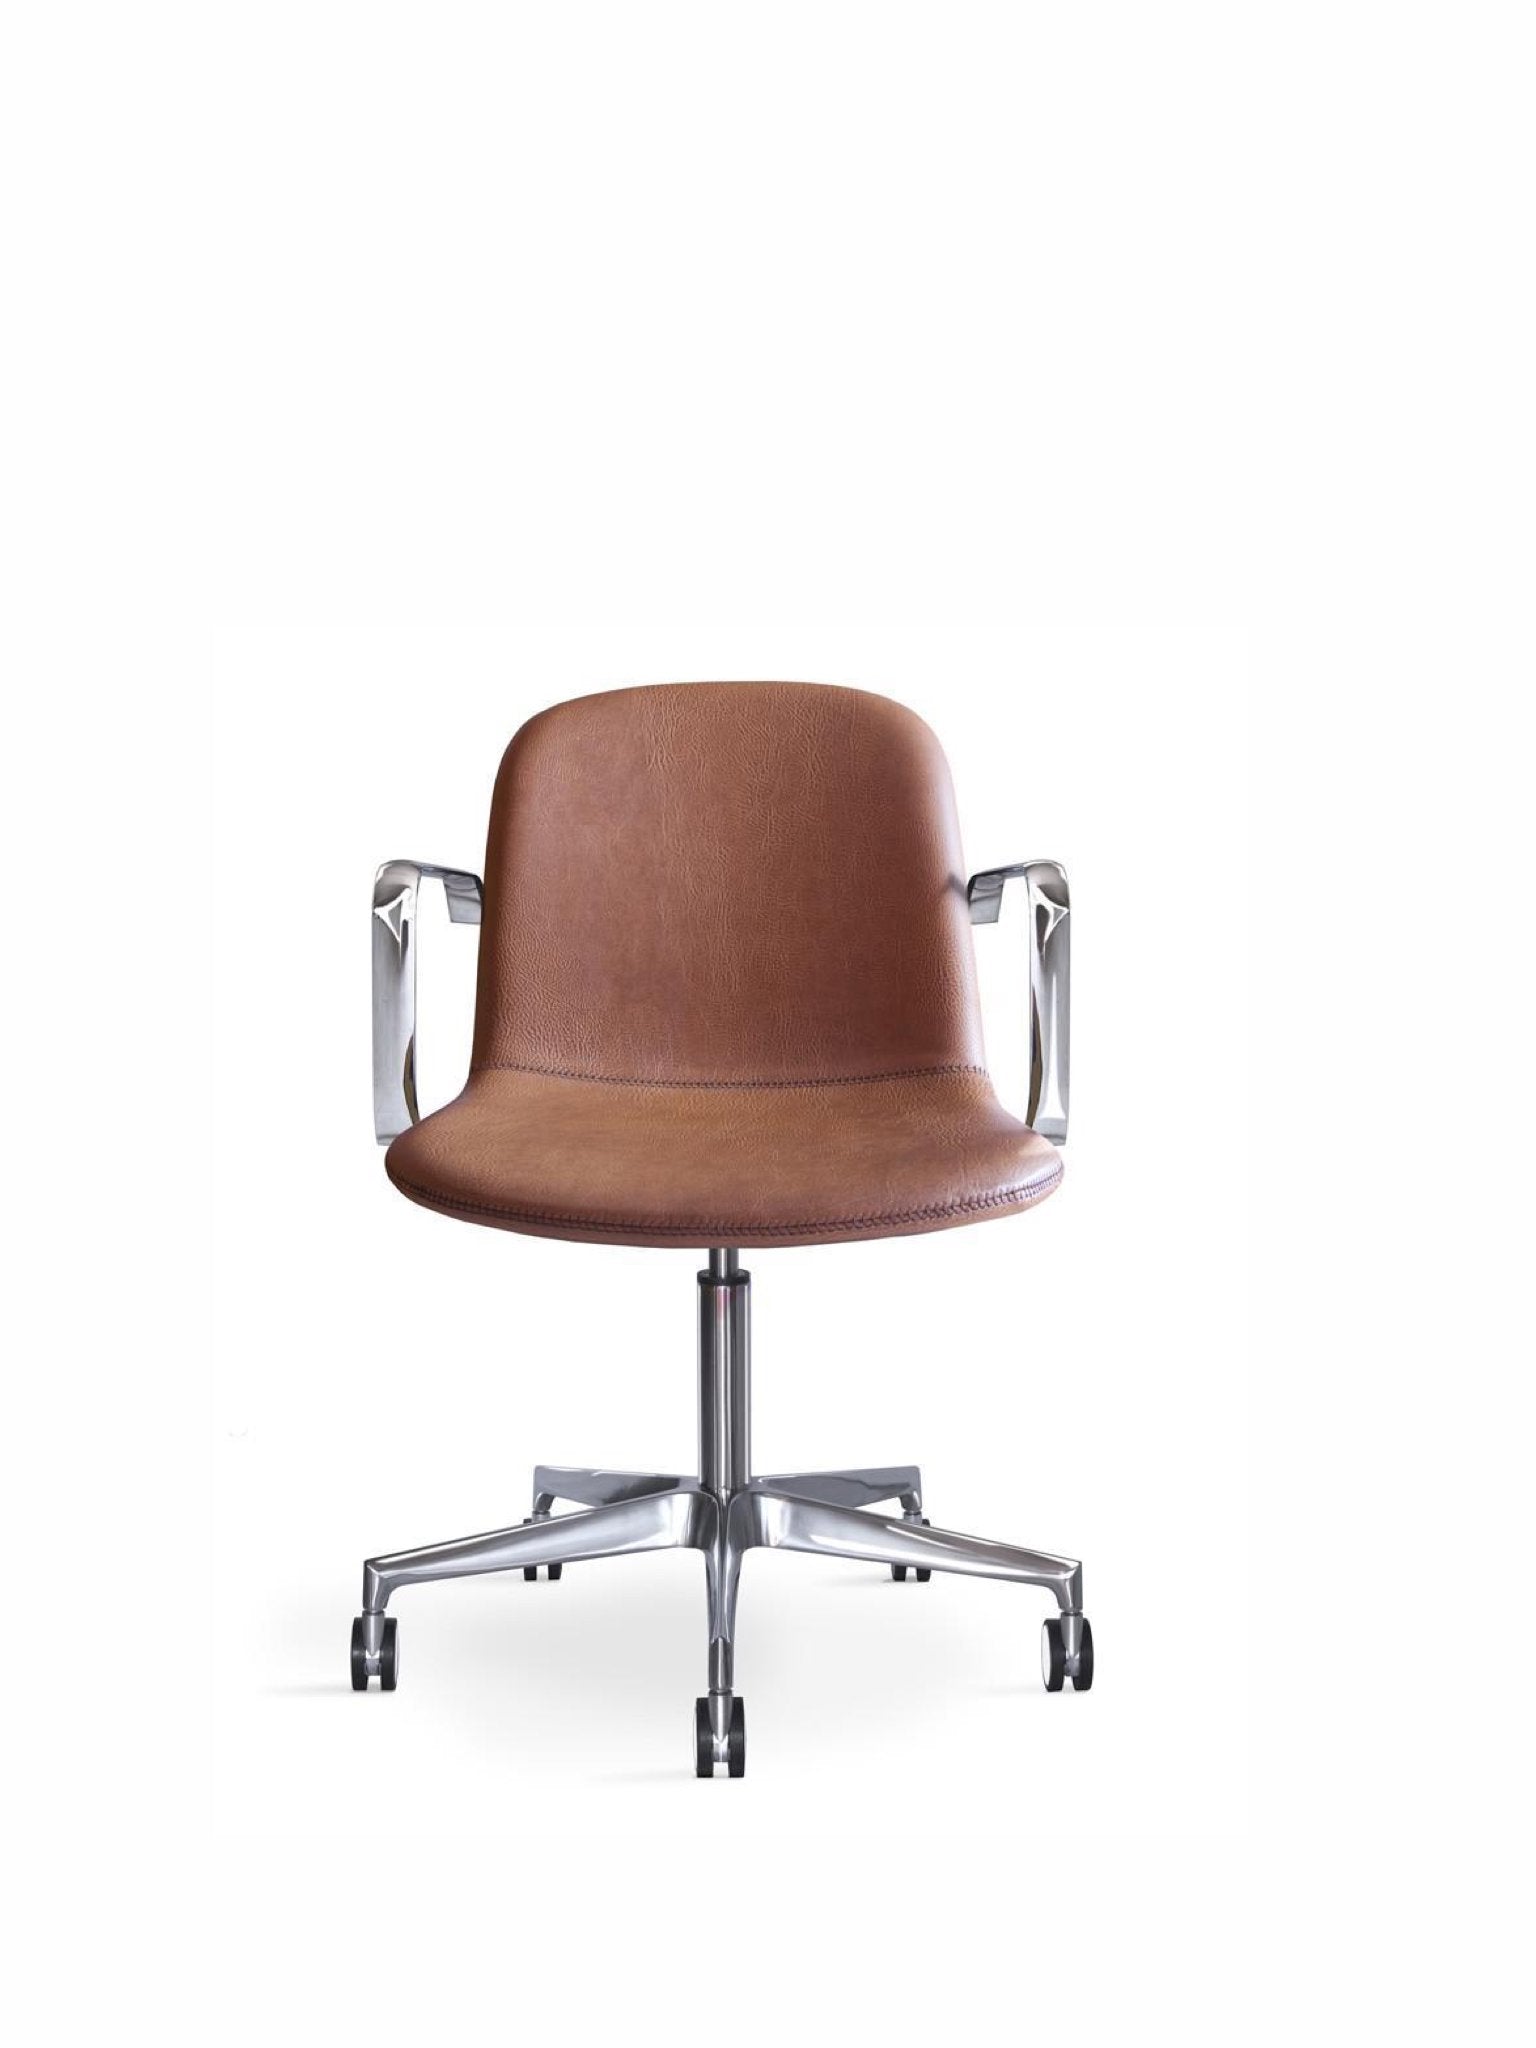 Bacco Office Armchair-Job's-Contract Furniture Store